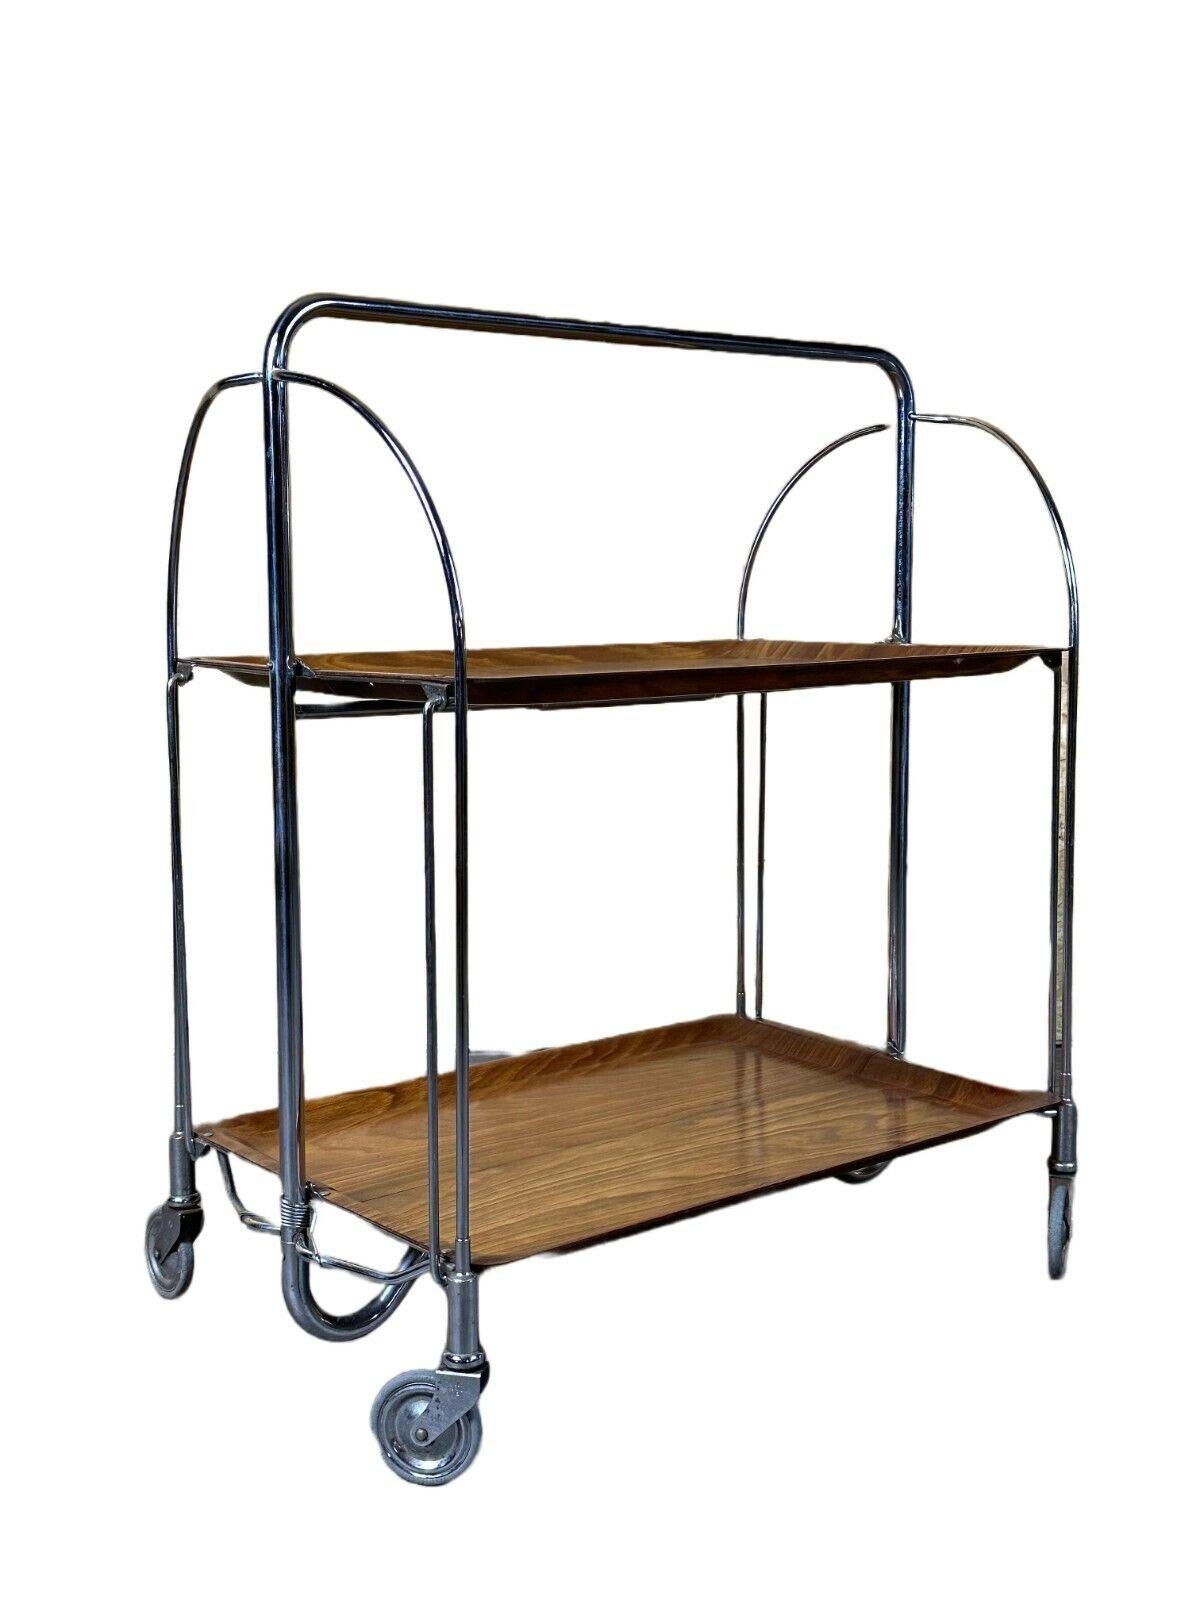 60s 70s serving trolley dinette side table space age brown design 60s 70s

Object: serving trolley

Manufacturer:

Condition: good

Age: around 1960-1970

Dimensions:

Width = 63.5cm
Depth = 41.5cm
Height = 77.5cm

Material: metal, plastic

Other